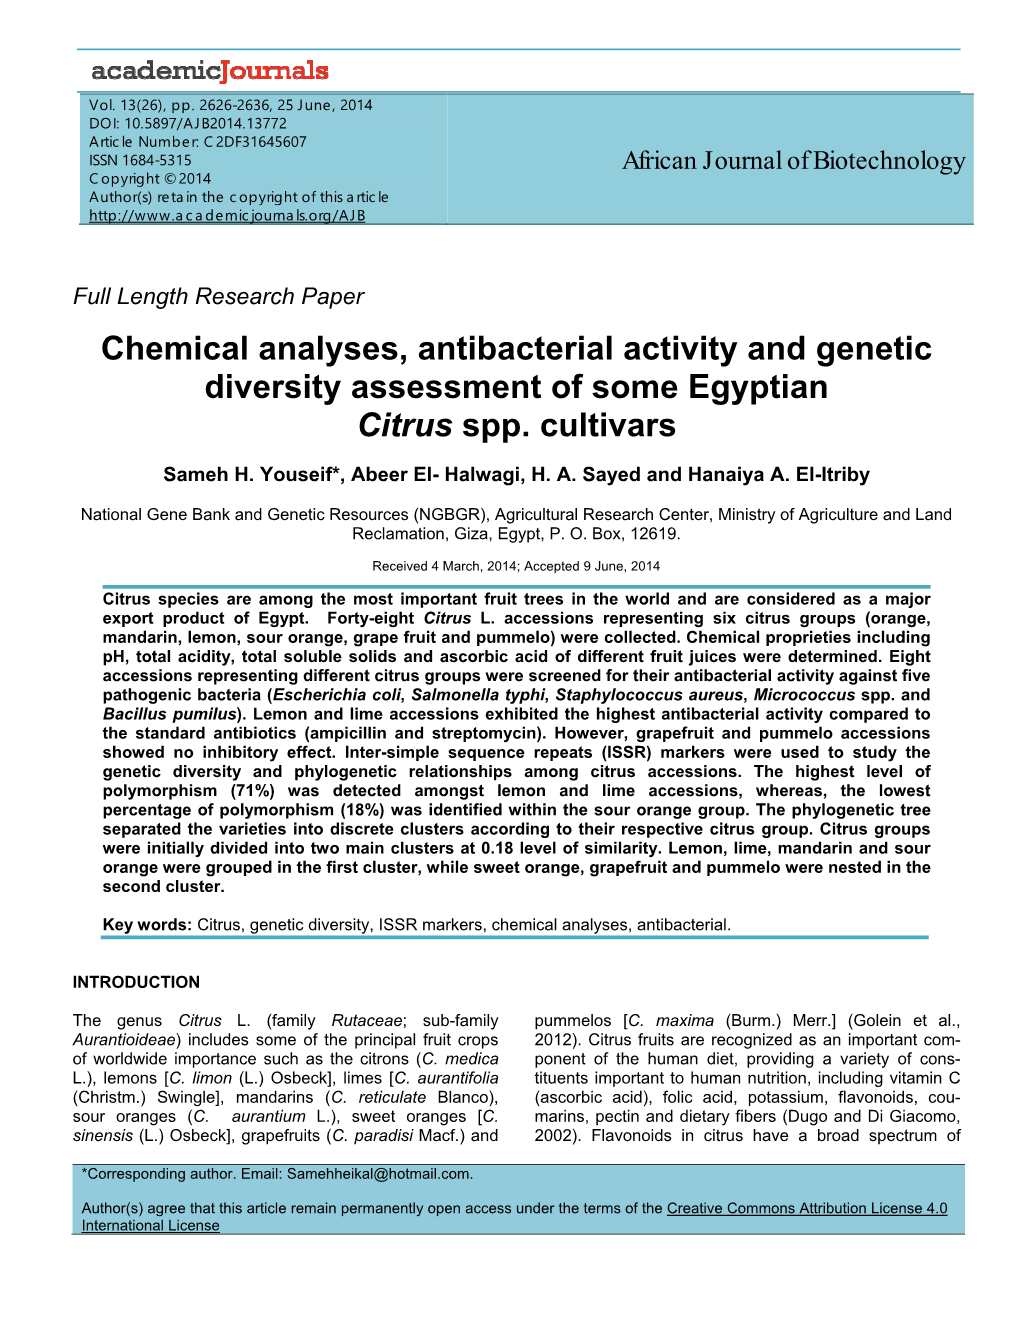 Chemical Analyses, Antibacterial Activity and Genetic Diversity Assessment of Some Egyptian Citrus Spp